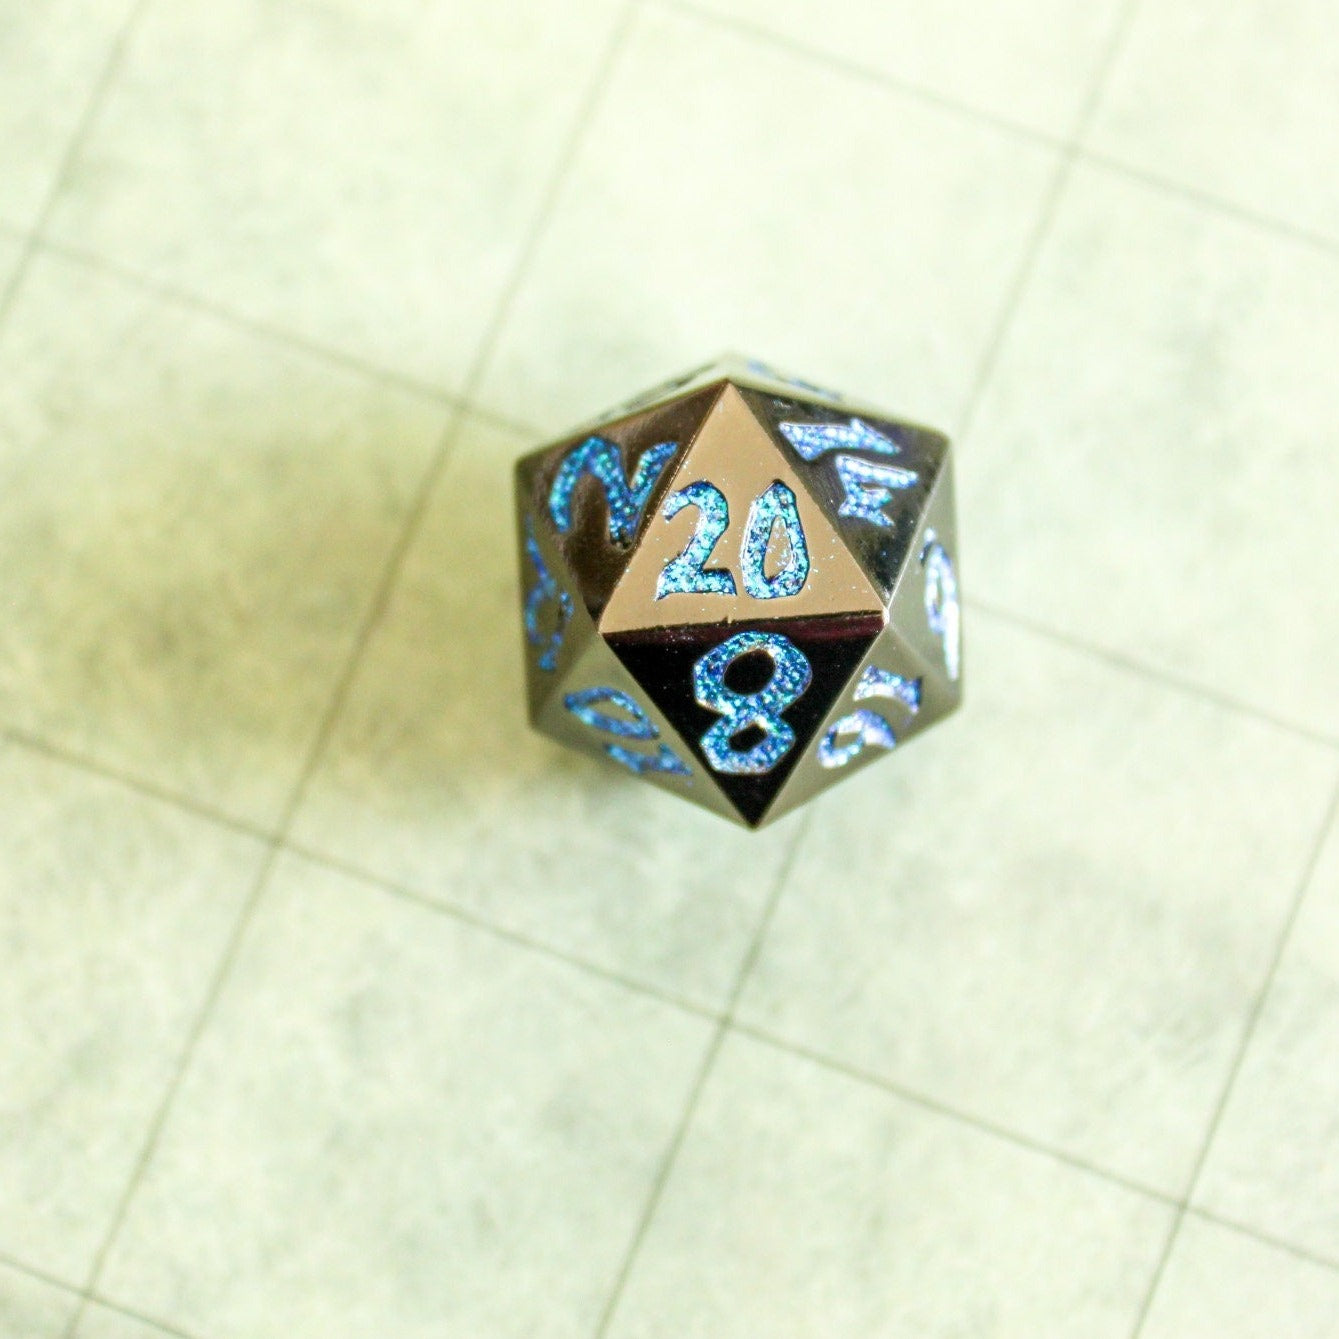 Black Metal with Blue Glitter DnD Dice Set | Dungeons and Dragons Dice | Metal Dice Tabletop Set